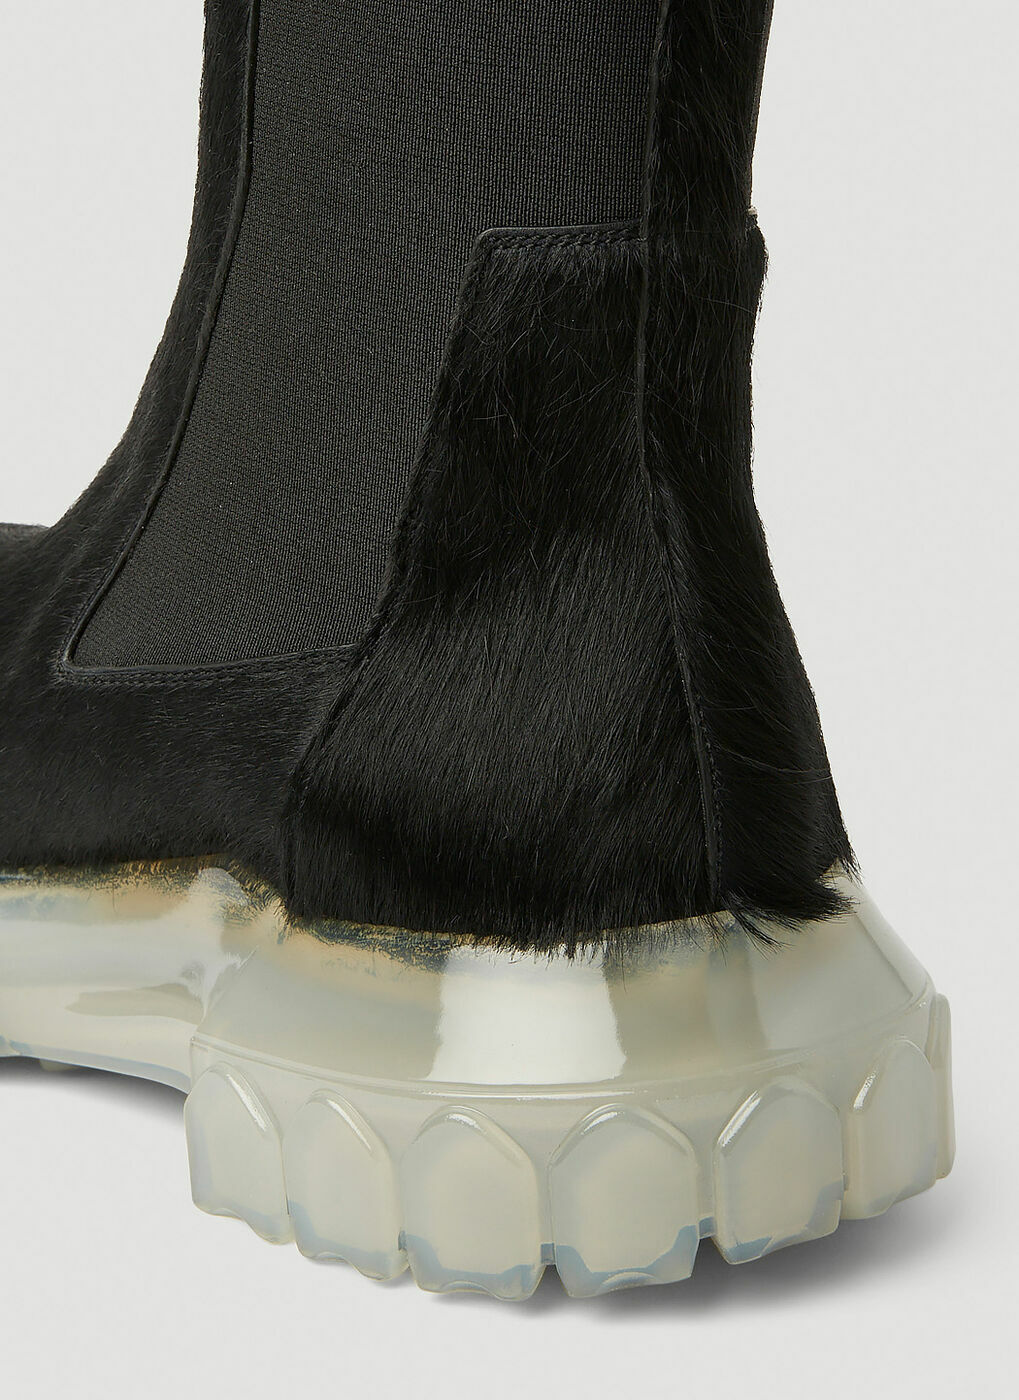 Hairy Chelsea Boots in Black